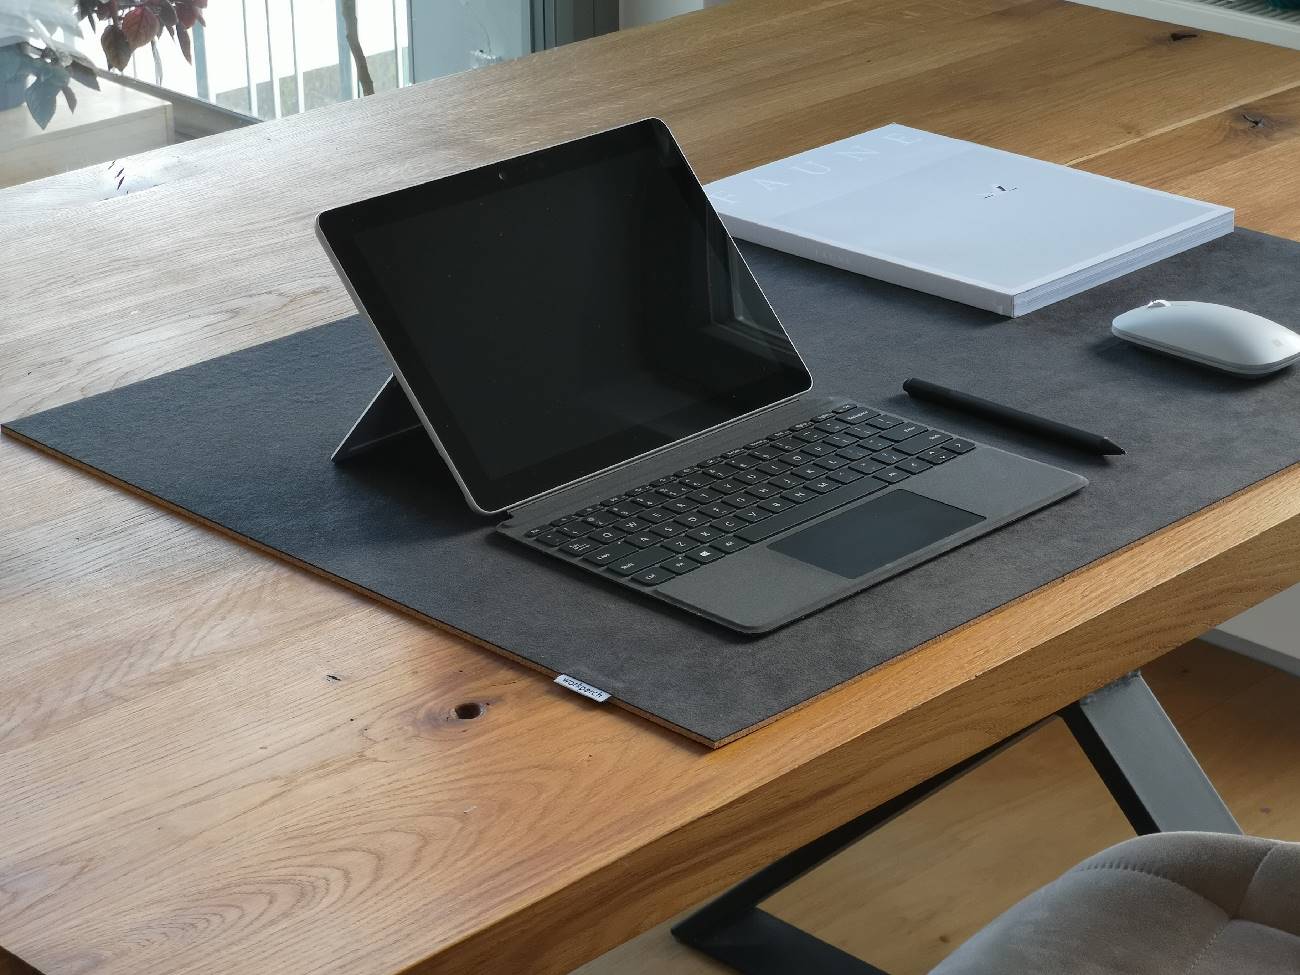 Are Microsoft Surface Laptops Reliable and Durable (Buyer's Guide)